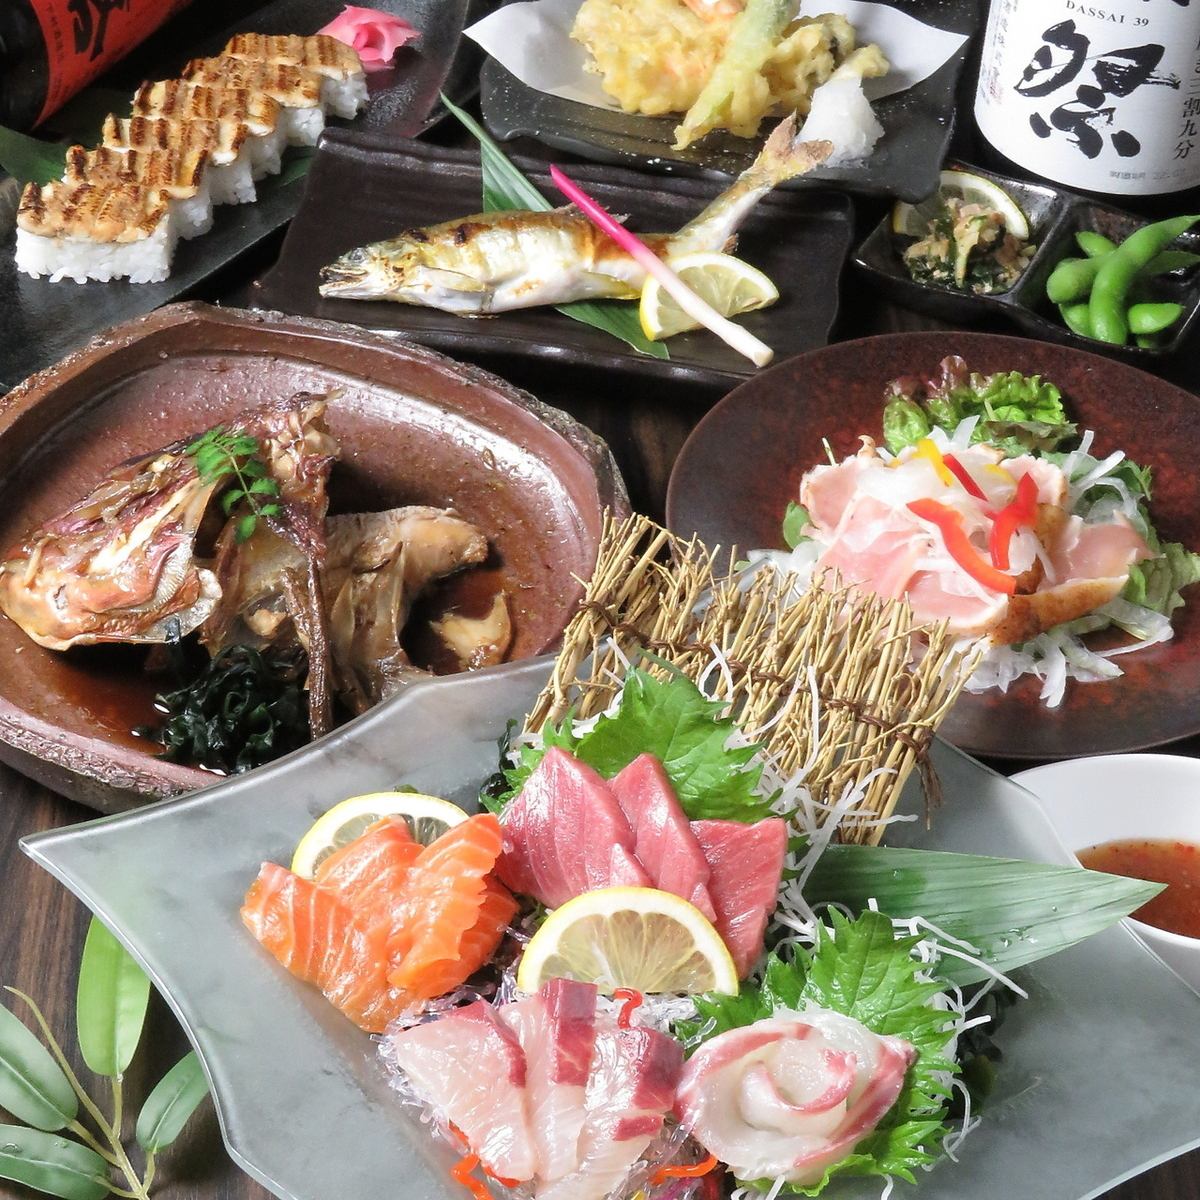 You can enjoy hotpots and fresh sashimi, perfect for the cold season.